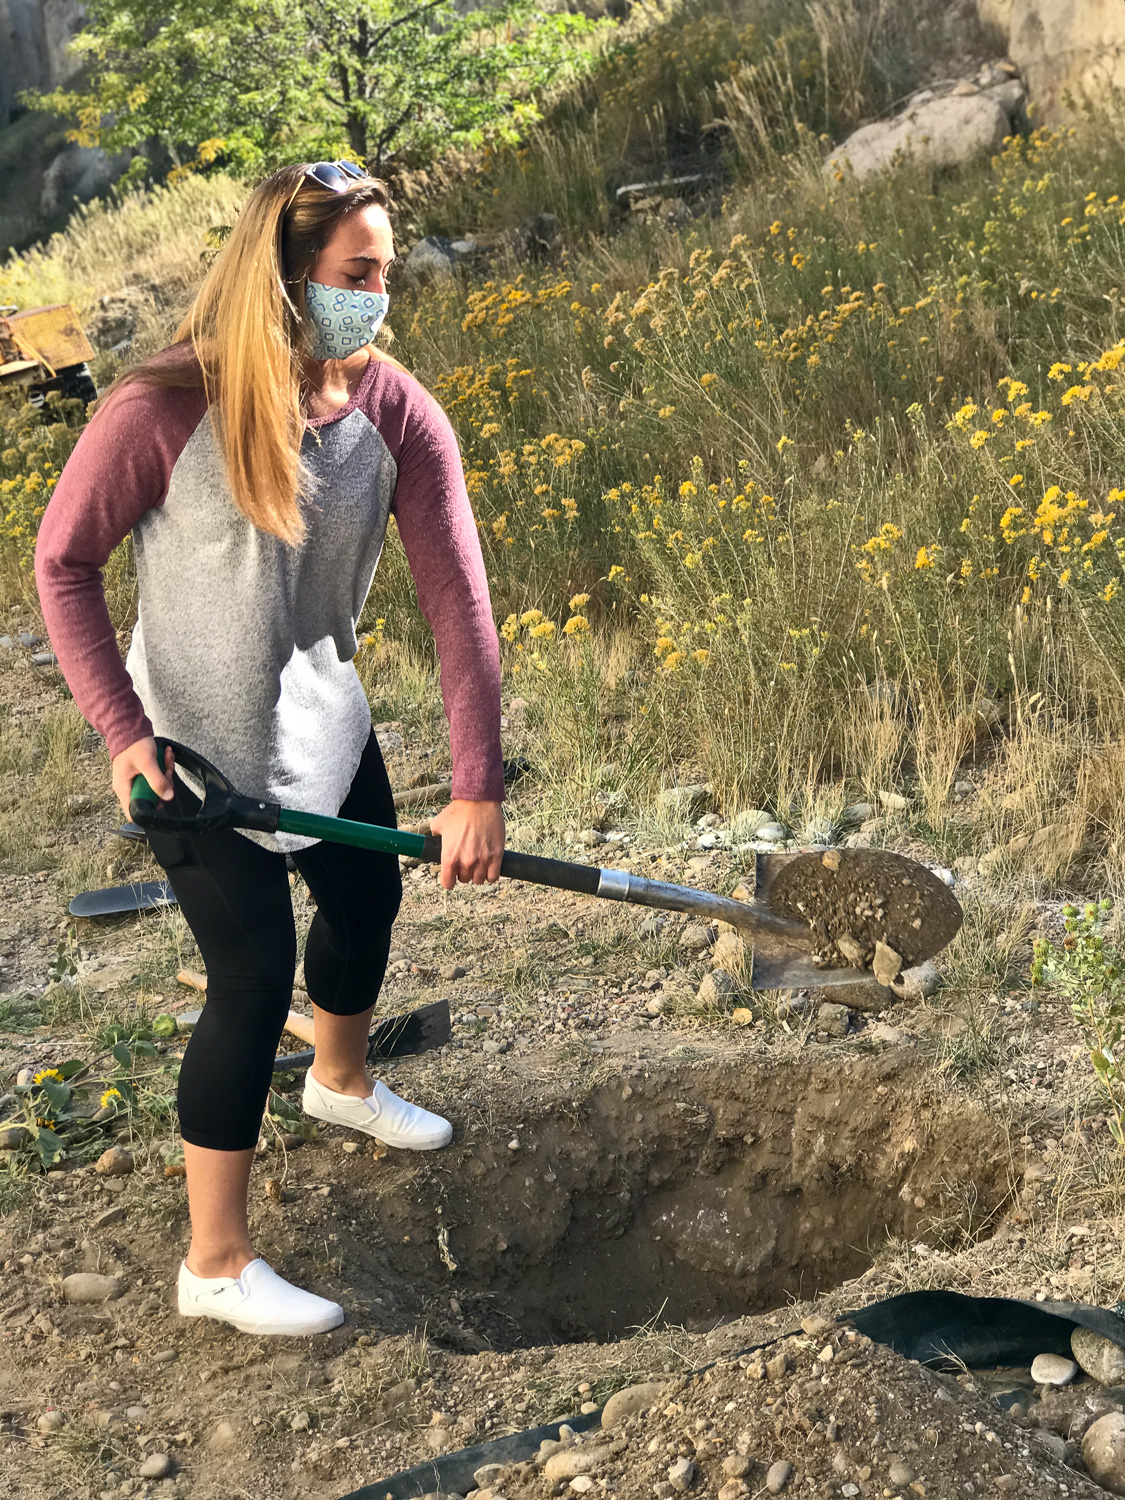 Rachel Willis, Mines student, continues the excavation in some very hard backfill. Photo credit: Ebru Bozdag.